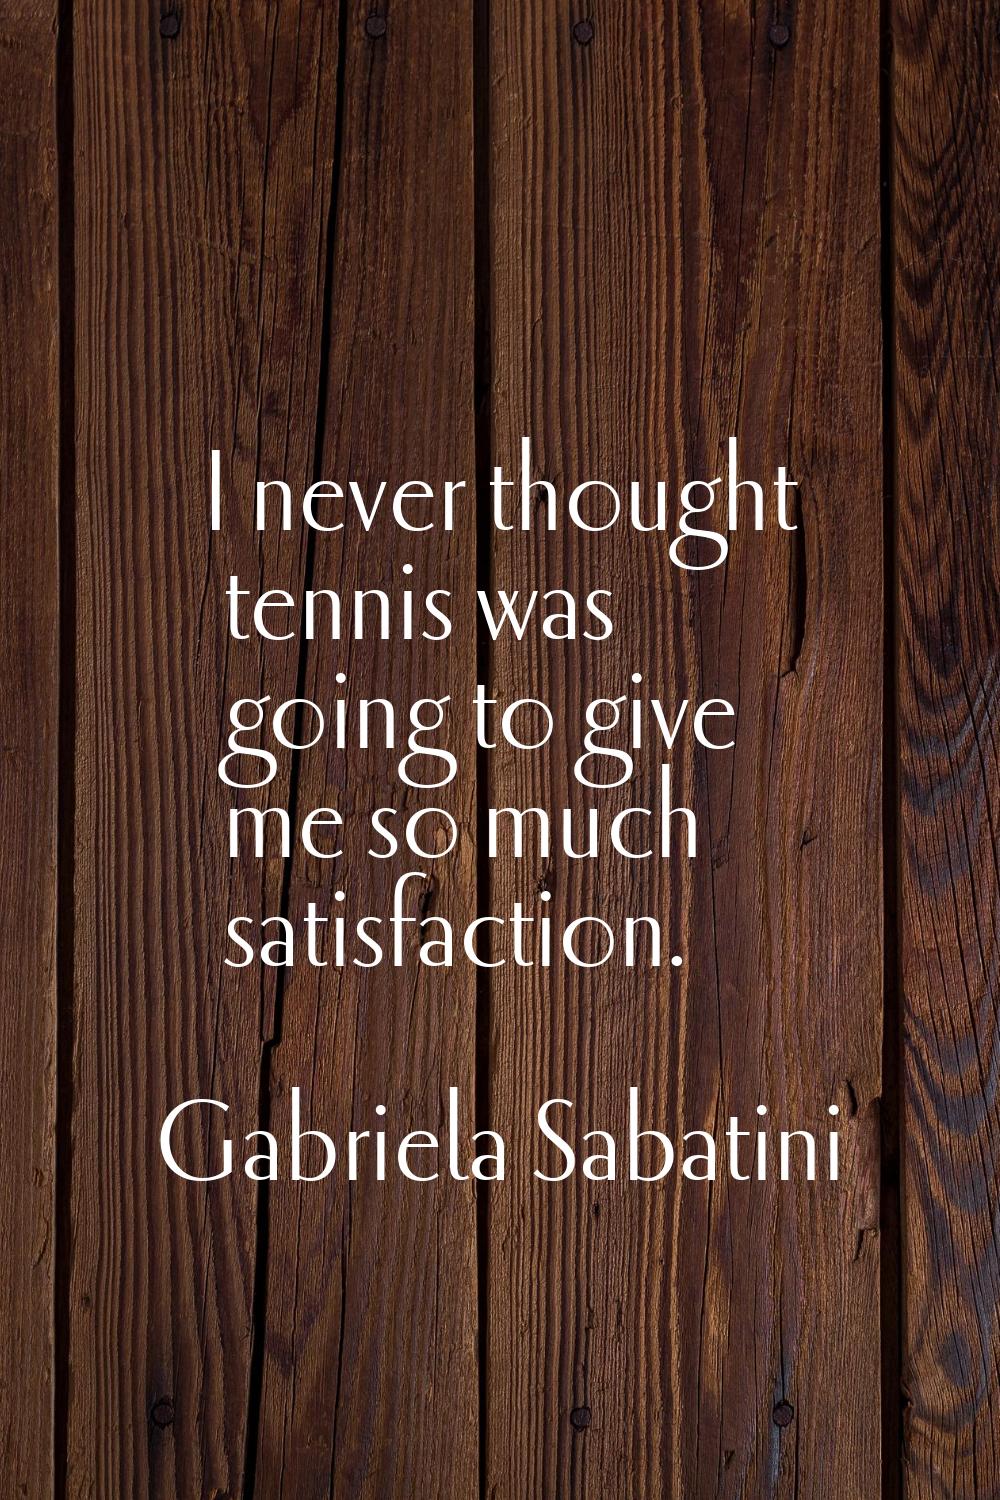 I never thought tennis was going to give me so much satisfaction.